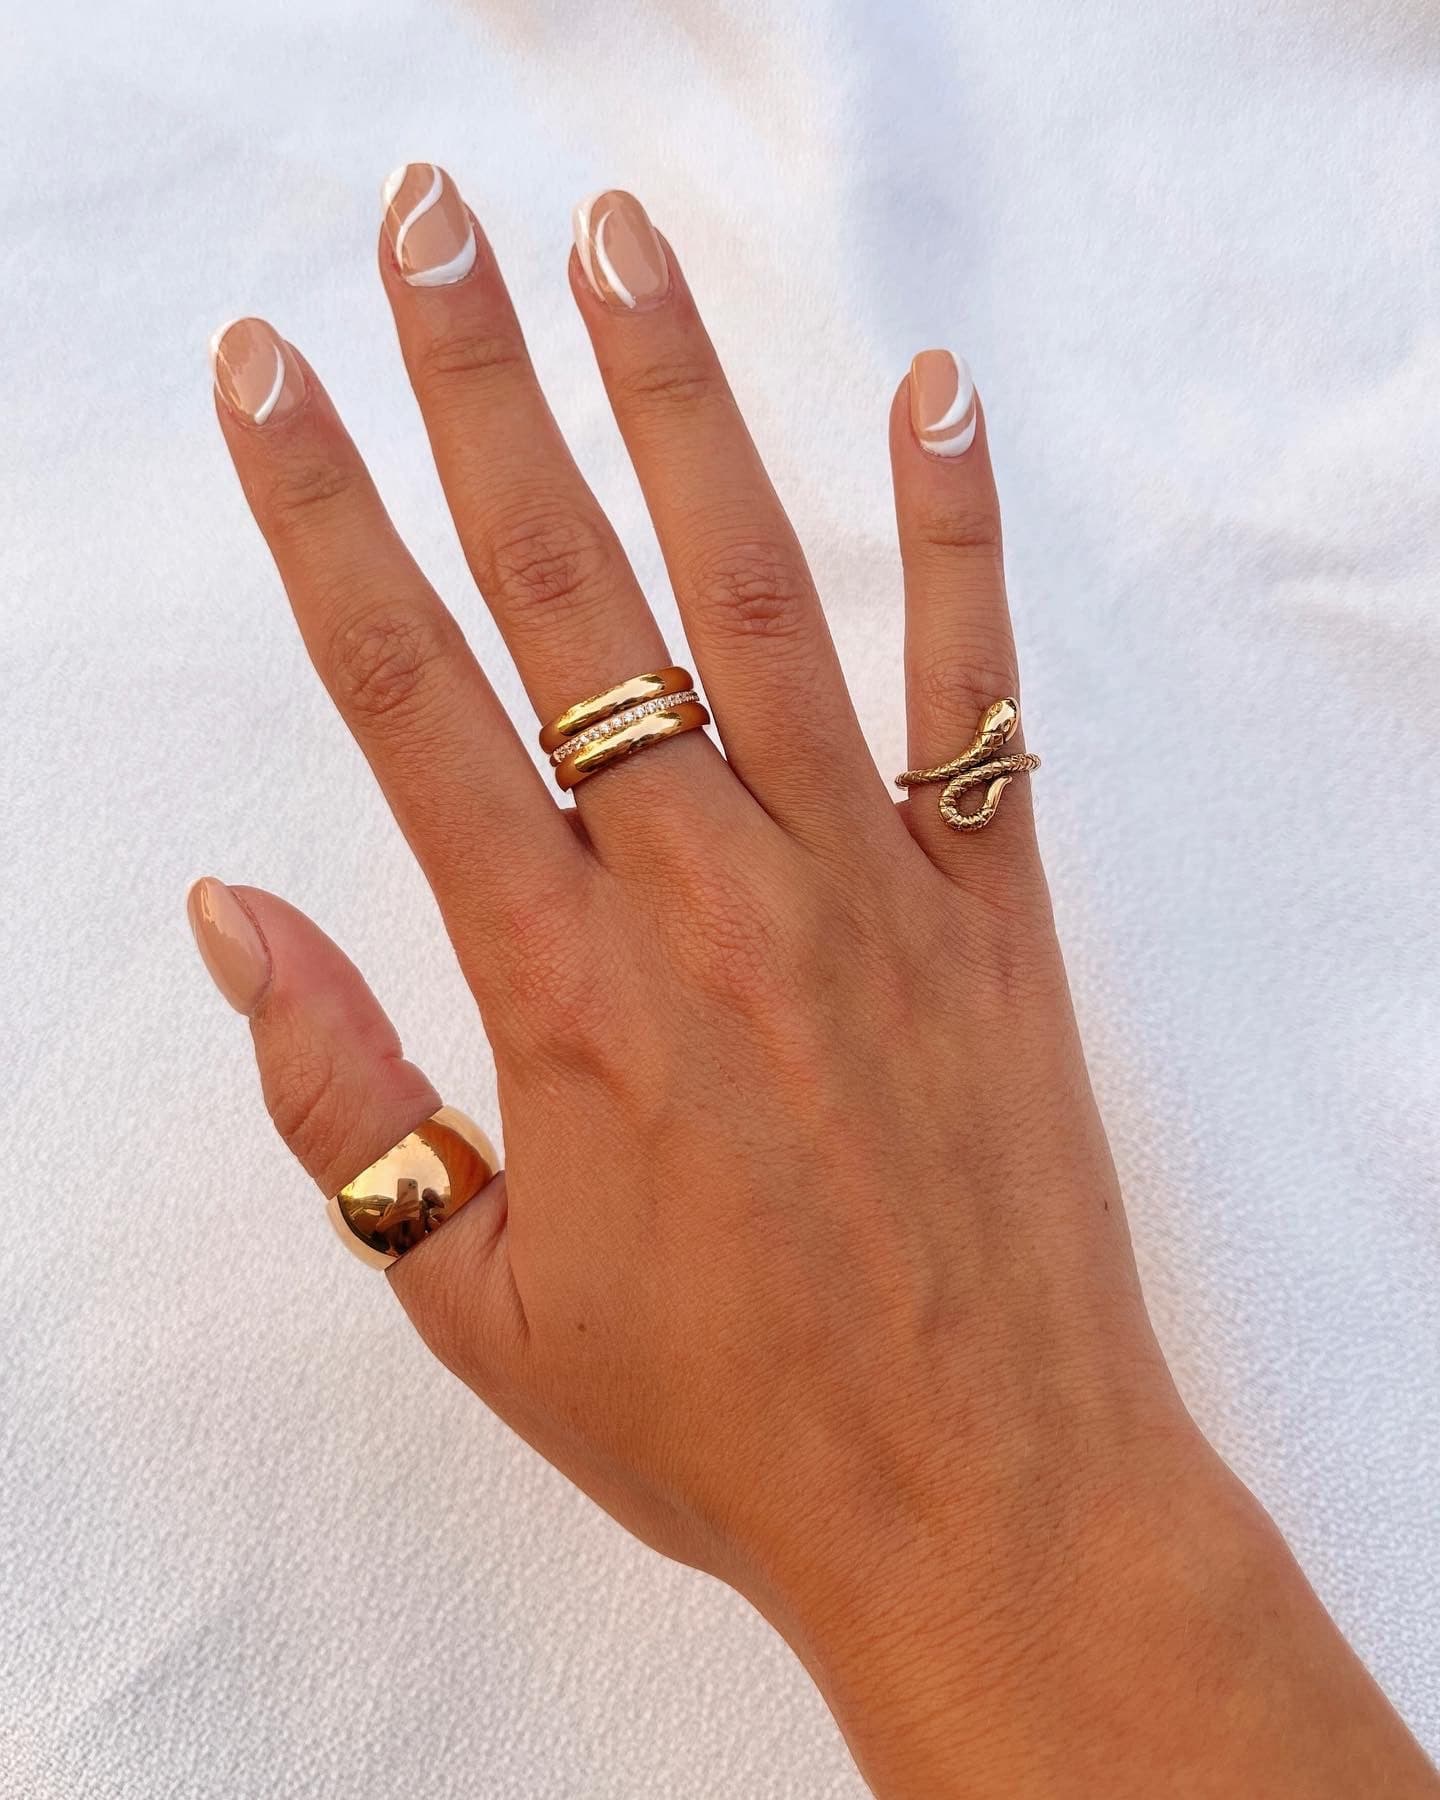 Gold rings for women, gold ring set, gold rings with diamond, gold rings that don’t tarnish, gold ring band, gold necklace for women, snake ring silver, snake ring gold, snake ring sterling silver, snake ring gold, 